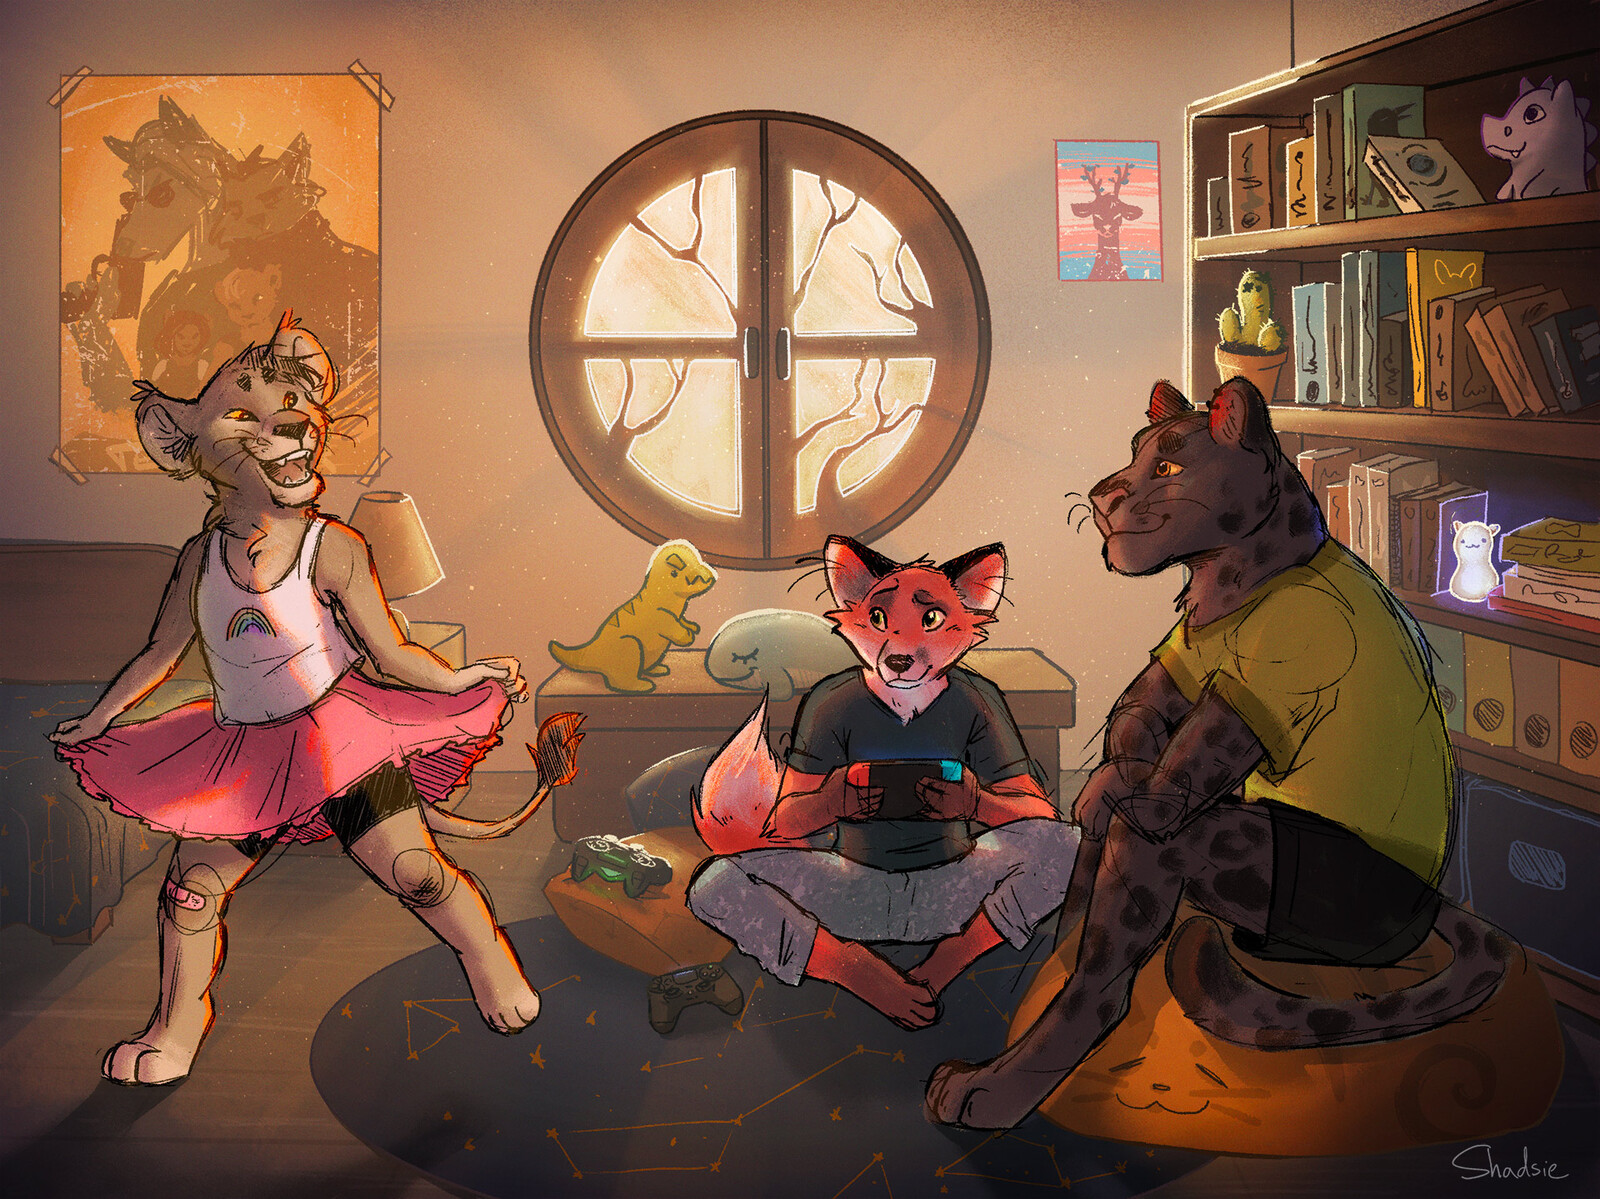 Final illustration - Lion cub showing off his awesome new skirt to his friends